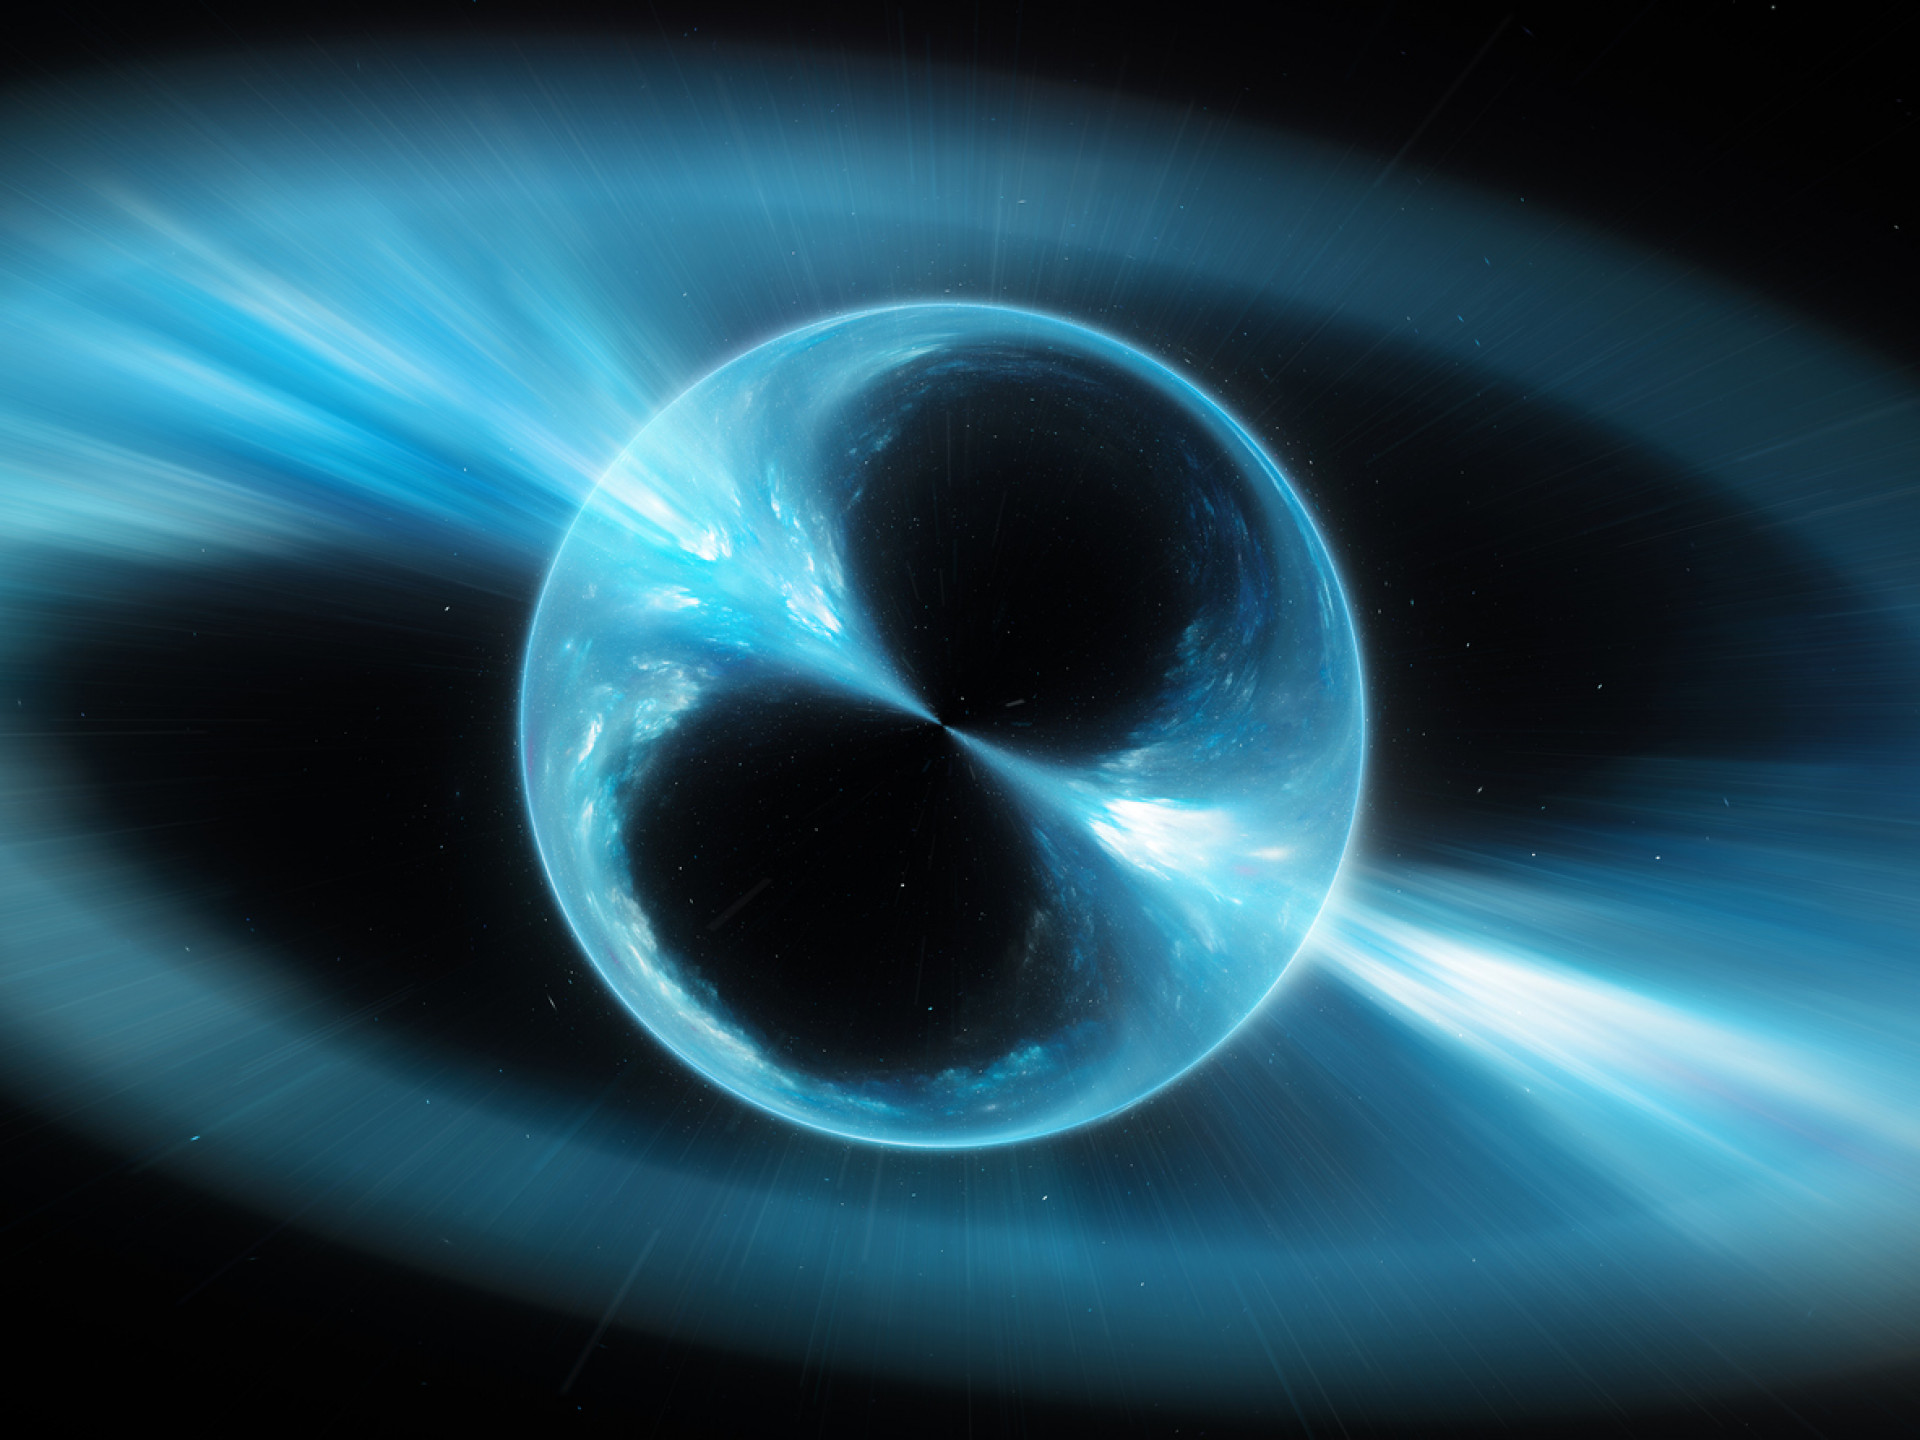 Mathematical models shed new light on the interior of neutron stars - Euro Journal - NEWS AGENCY